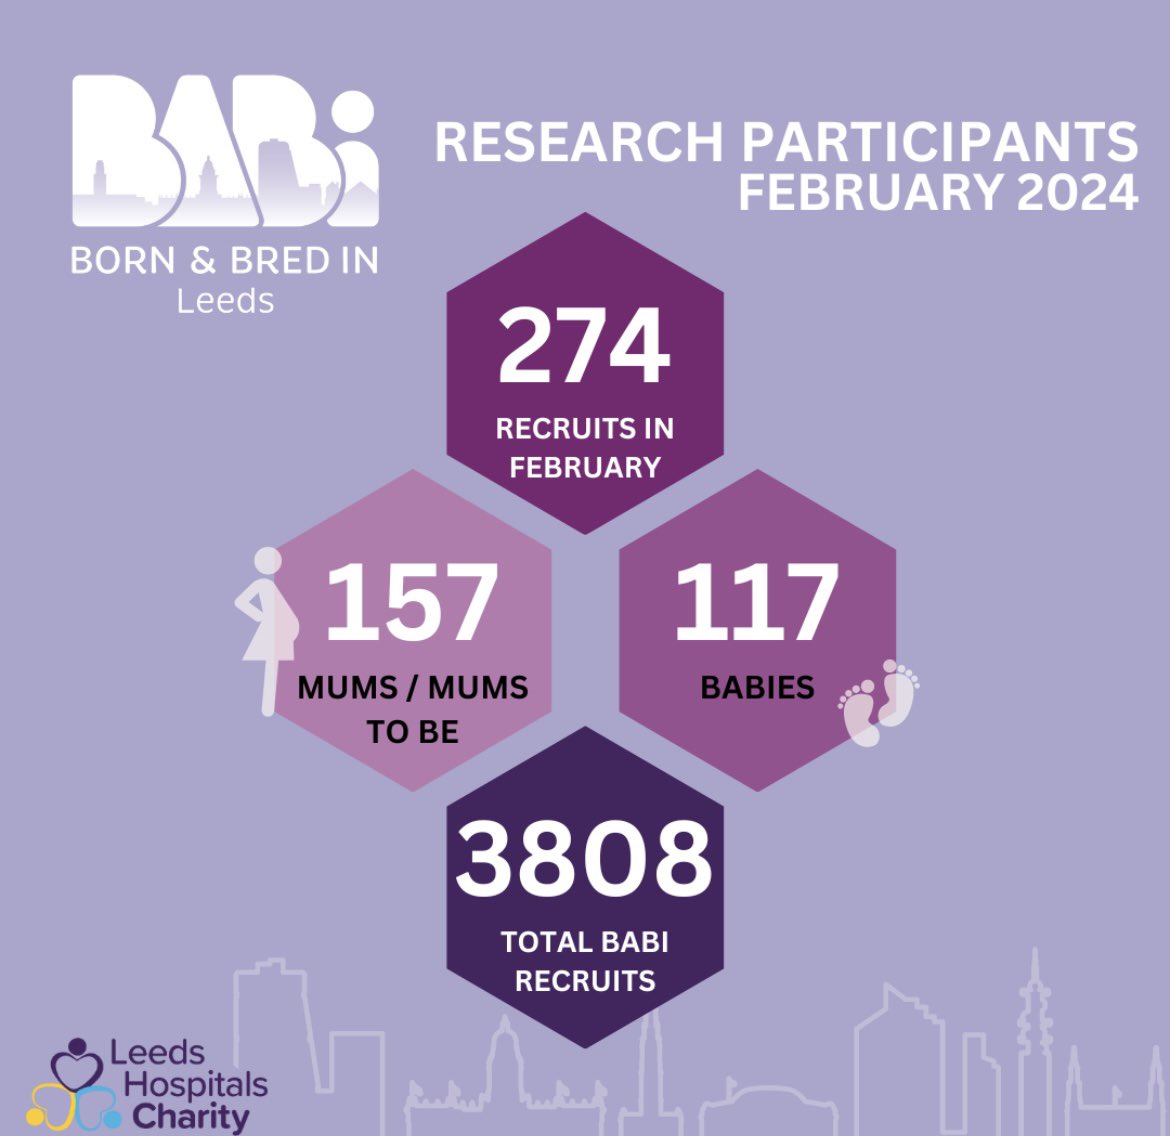 Check out our BABi Leeds figures for the month of February 2️⃣7️⃣4️⃣ This is amazing. A huge thank you for all your hard work on supporting the study & to all who have taken part so far. #bib4all @LDShospcharity @LeedsHospitals @leedsmaternity @crustymcrusty @scriven_emily